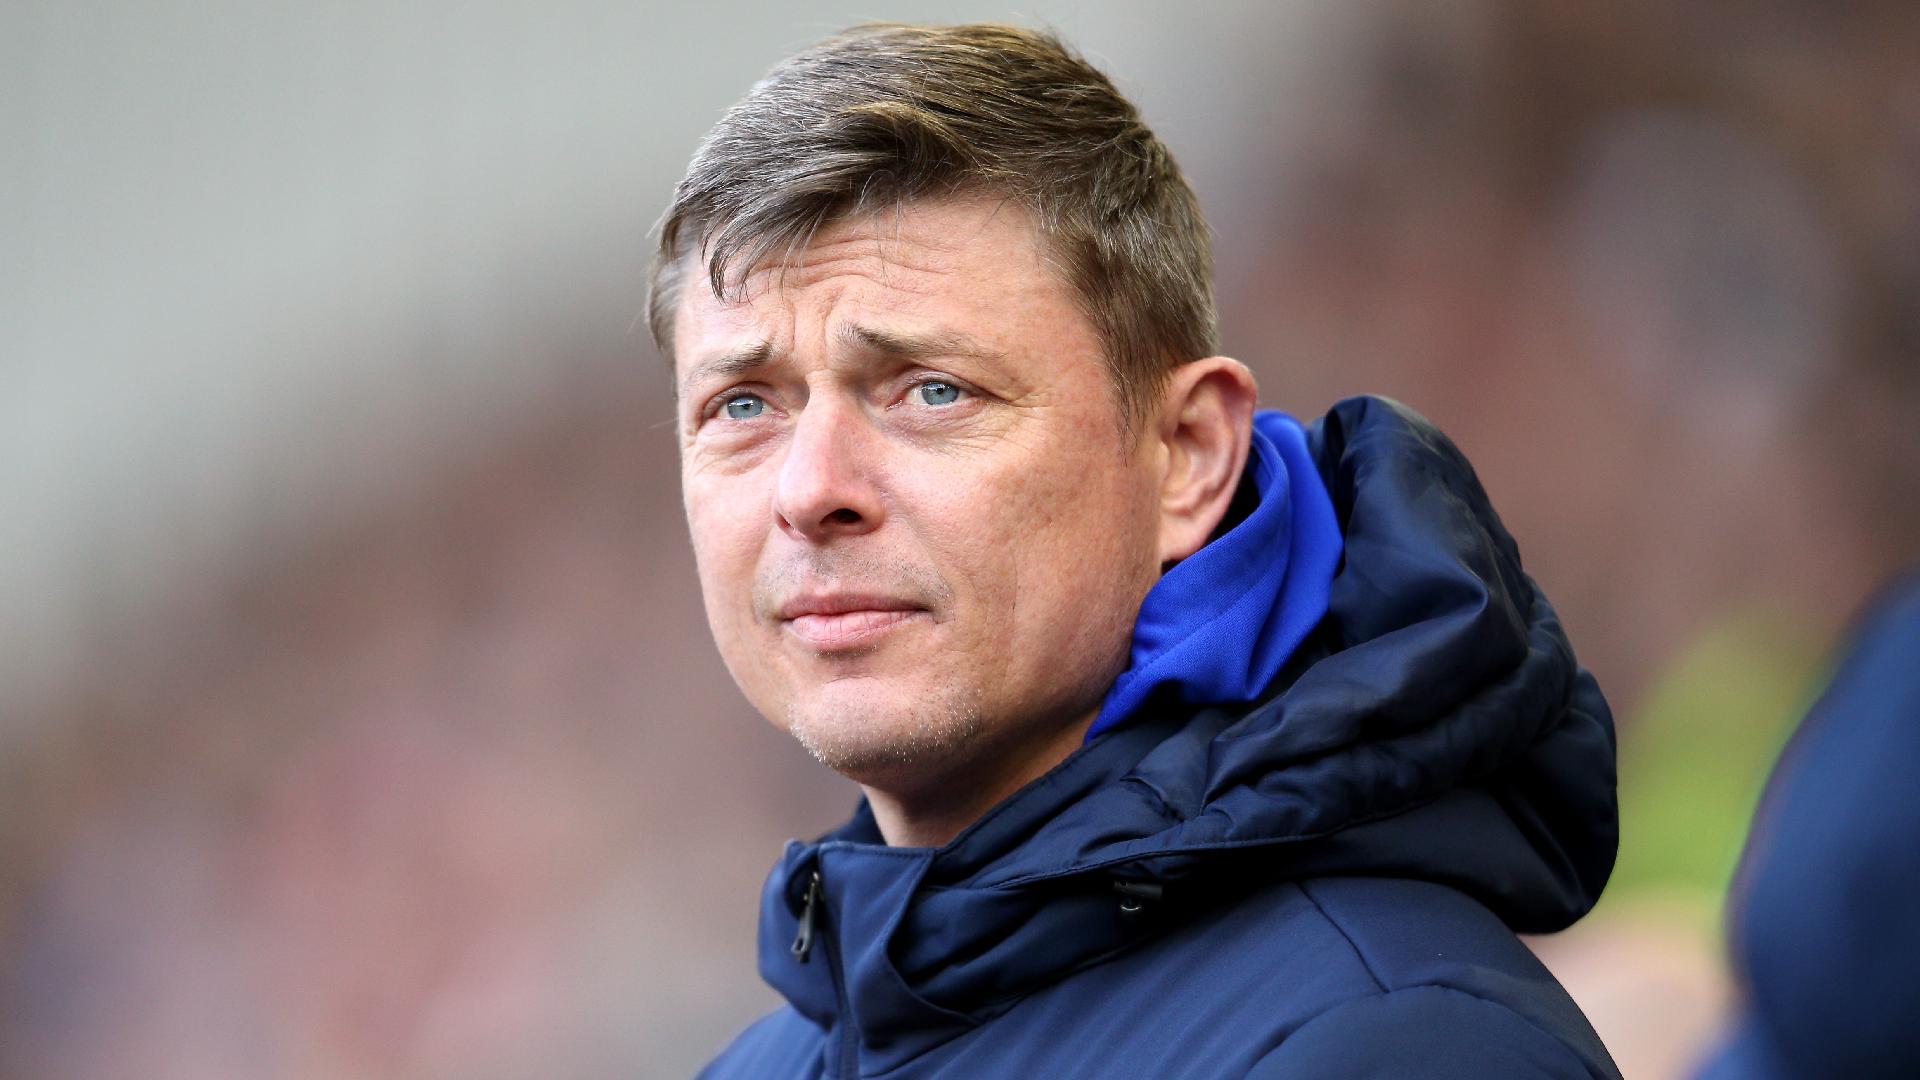 Jon Dahl Tomasson allows in-form Blackburn to dream of the big time